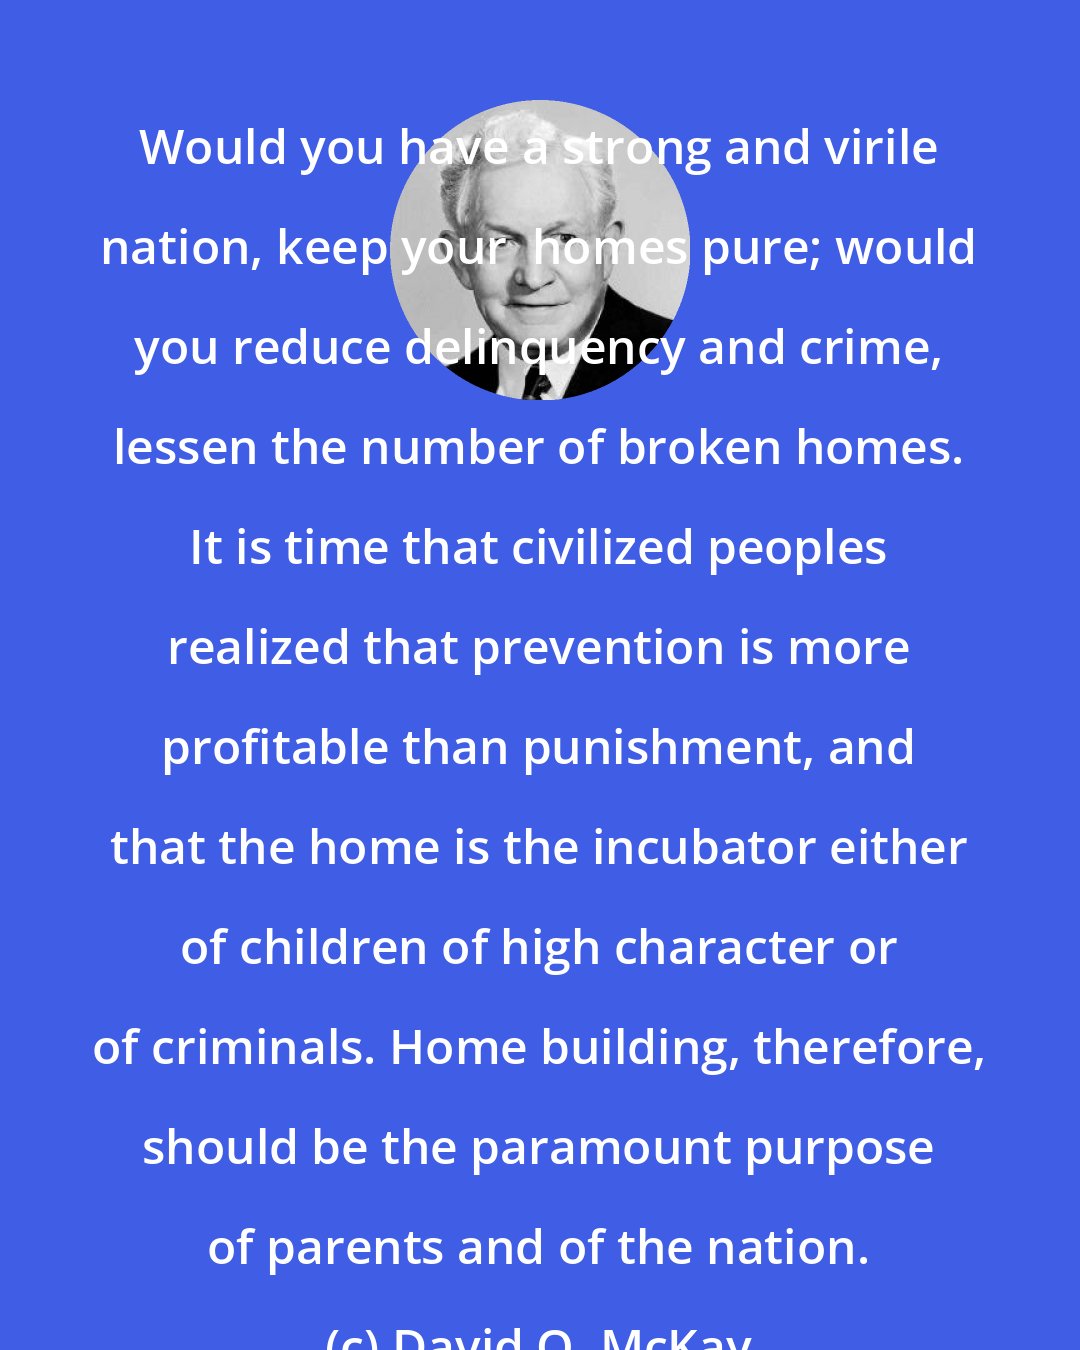 David O. McKay: Would you have a strong and virile nation, keep your  homes pure; would you reduce delinquency and crime, lessen the number of broken homes. It is time that civilized peoples realized that prevention is more profitable than punishment, and that the home is the incubator either of children of high character or of criminals. Home building, therefore, should be the paramount purpose of parents and of the nation.